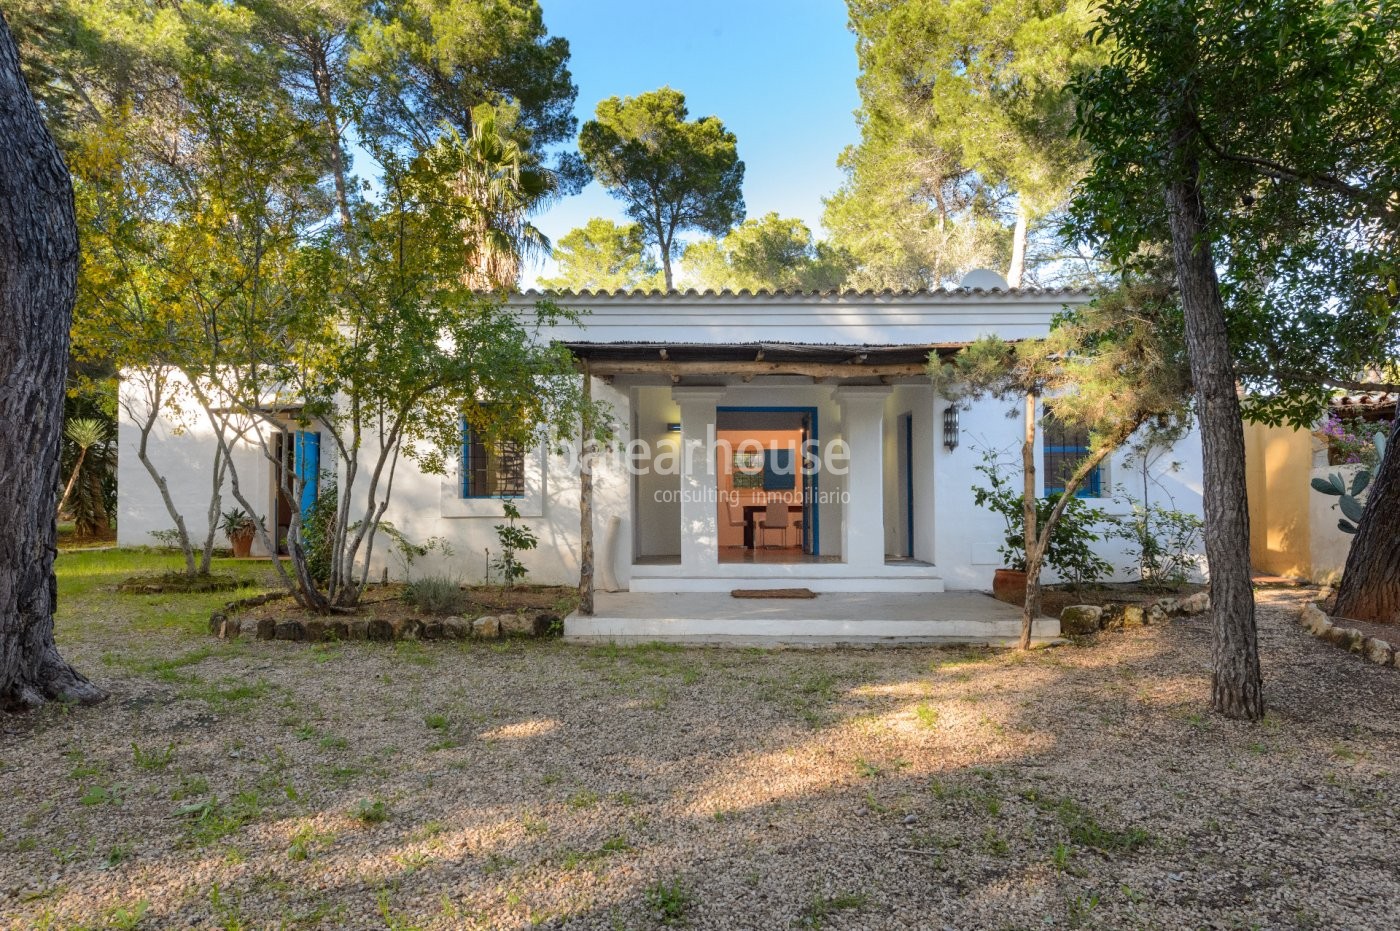 Cozy finca style house renovated in 2010 with rustic style near the city of Ibiza